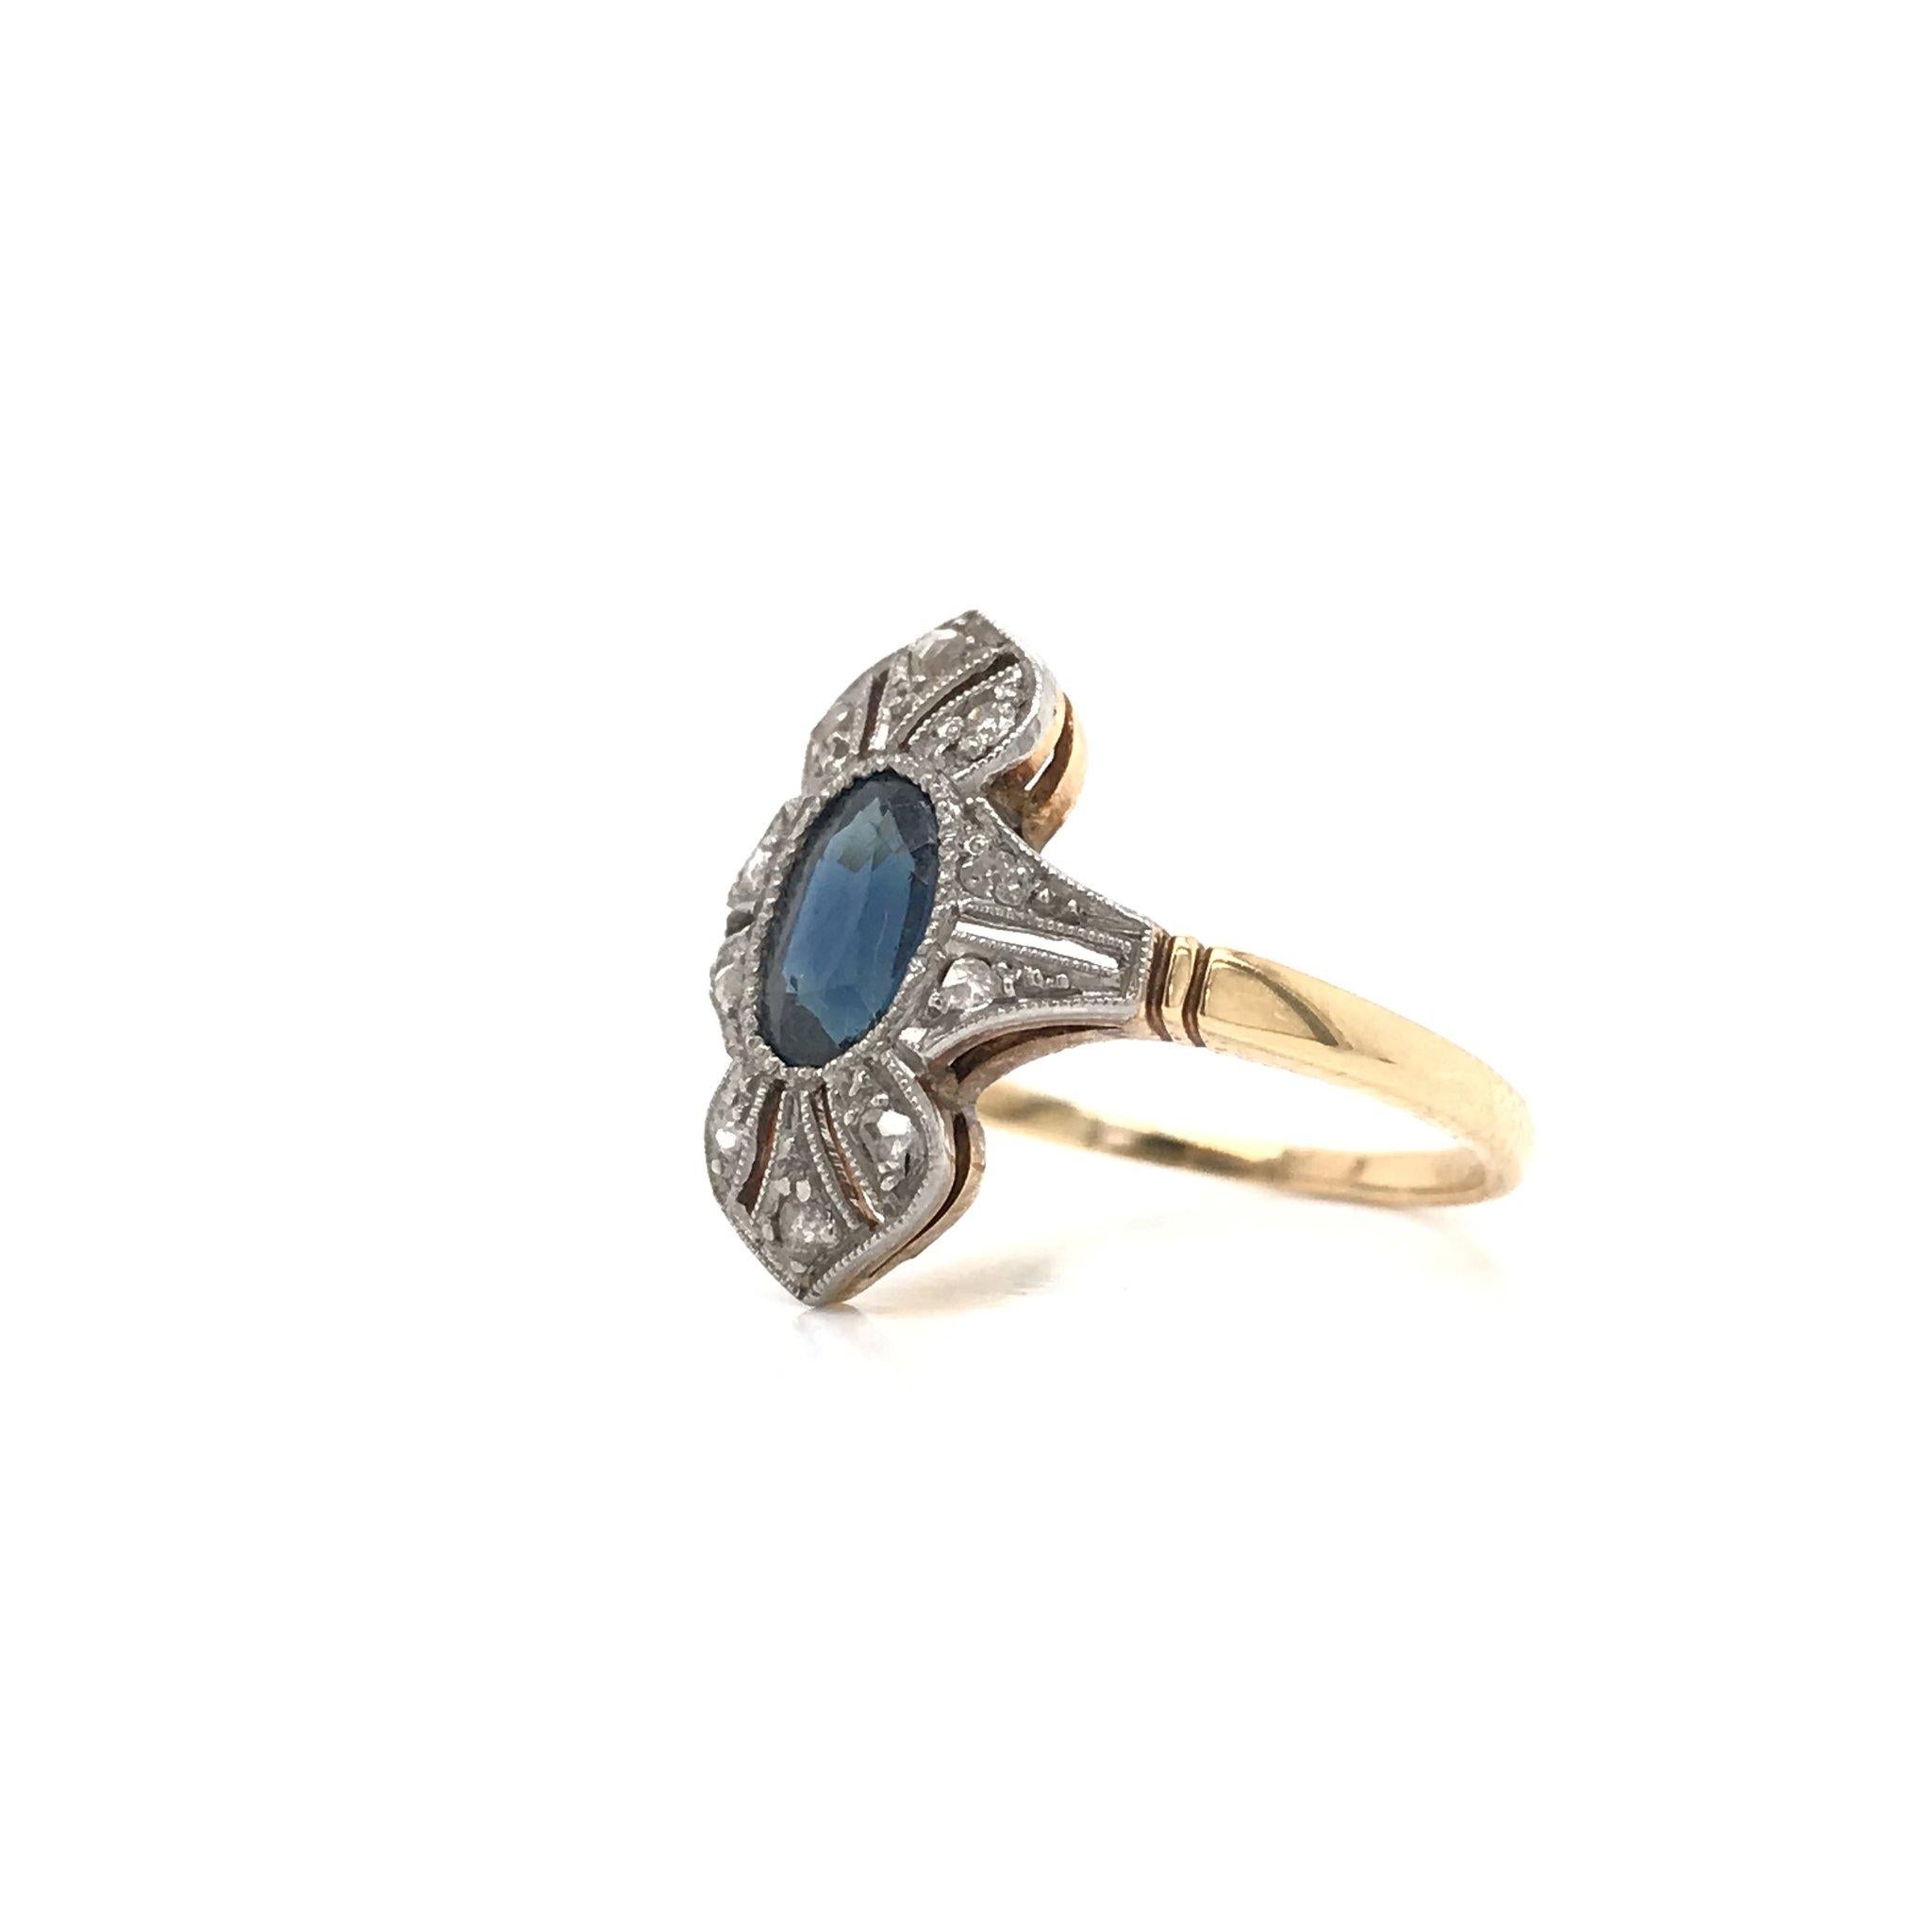 This antique piece was handcrafted sometime during the Art Deco design period ( 1920-1940 ). The shank and gallery of the ring are 14k yellow gold and the head is 14k white gold. The ring features a central oval cut blue sapphire. The setting also